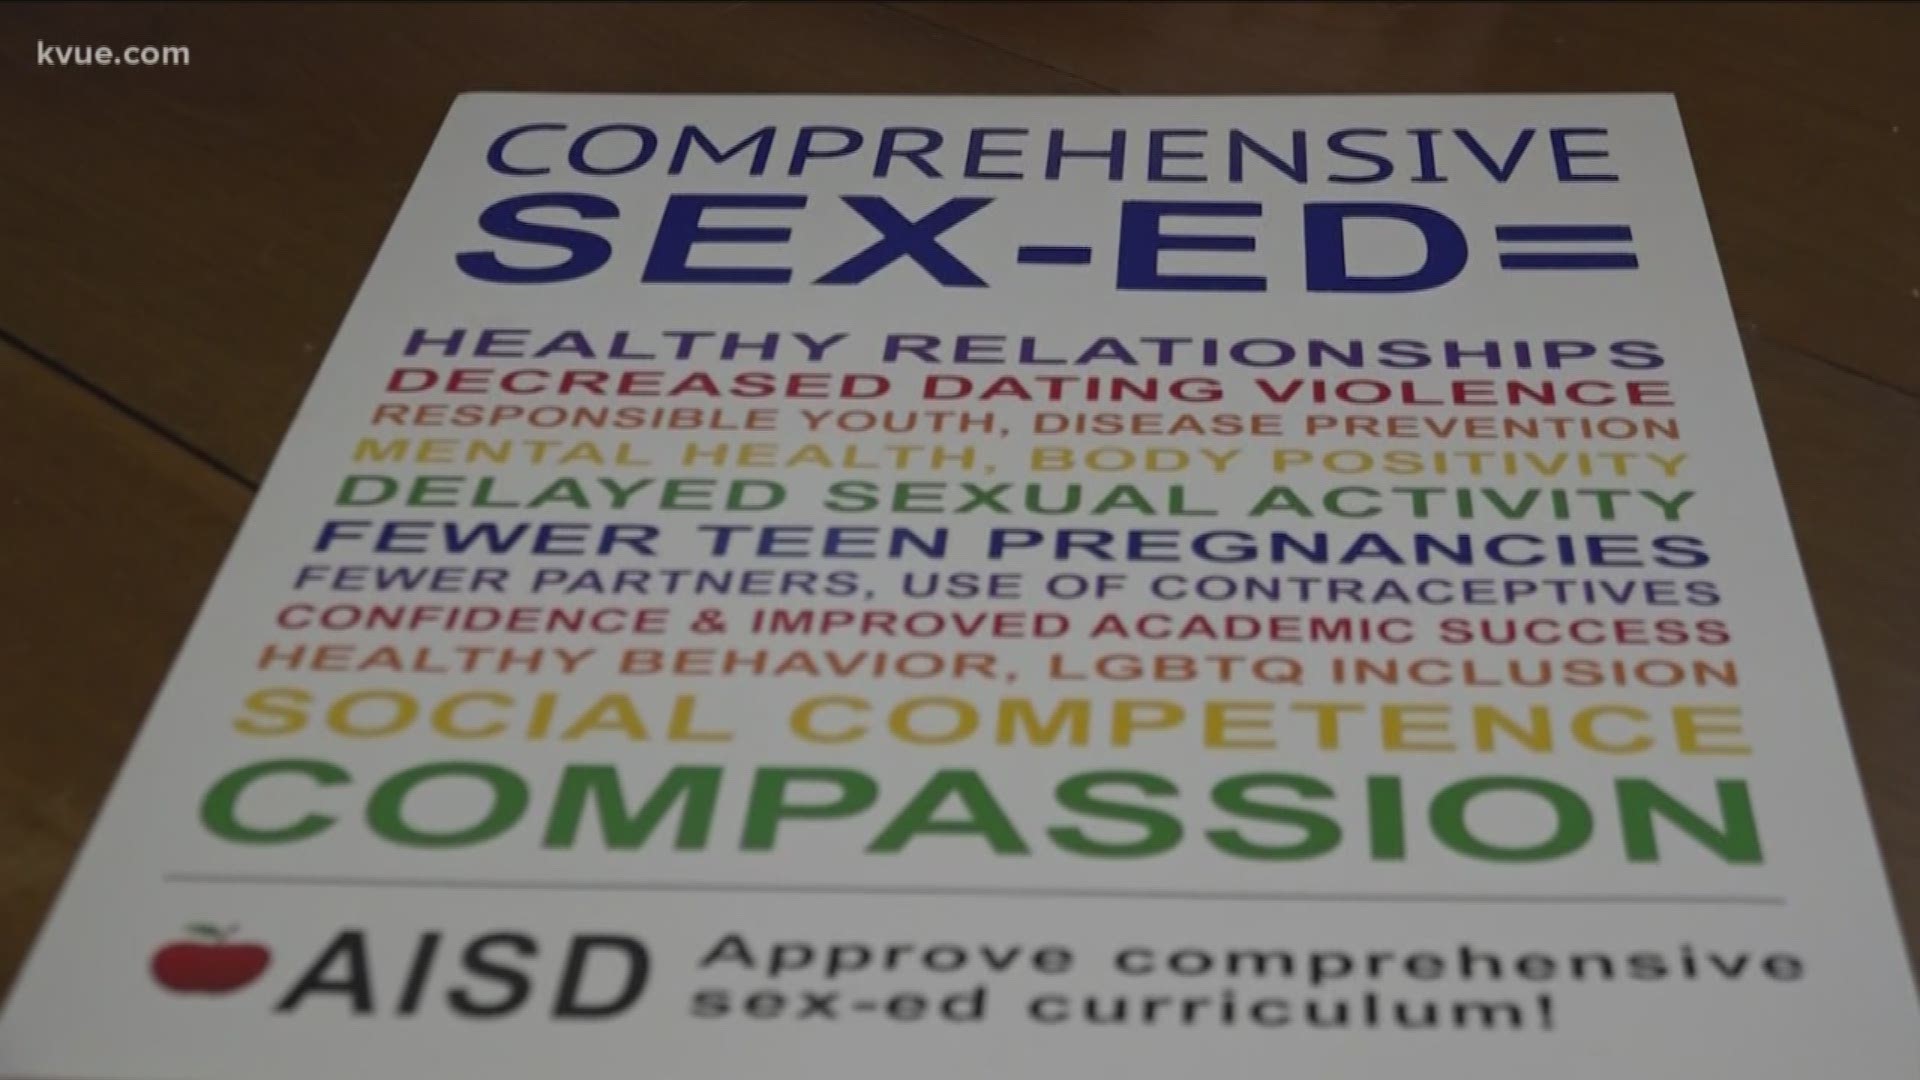 Sexual orientation and gender identity are some of the new topics included in the new sex-ed curriculum.